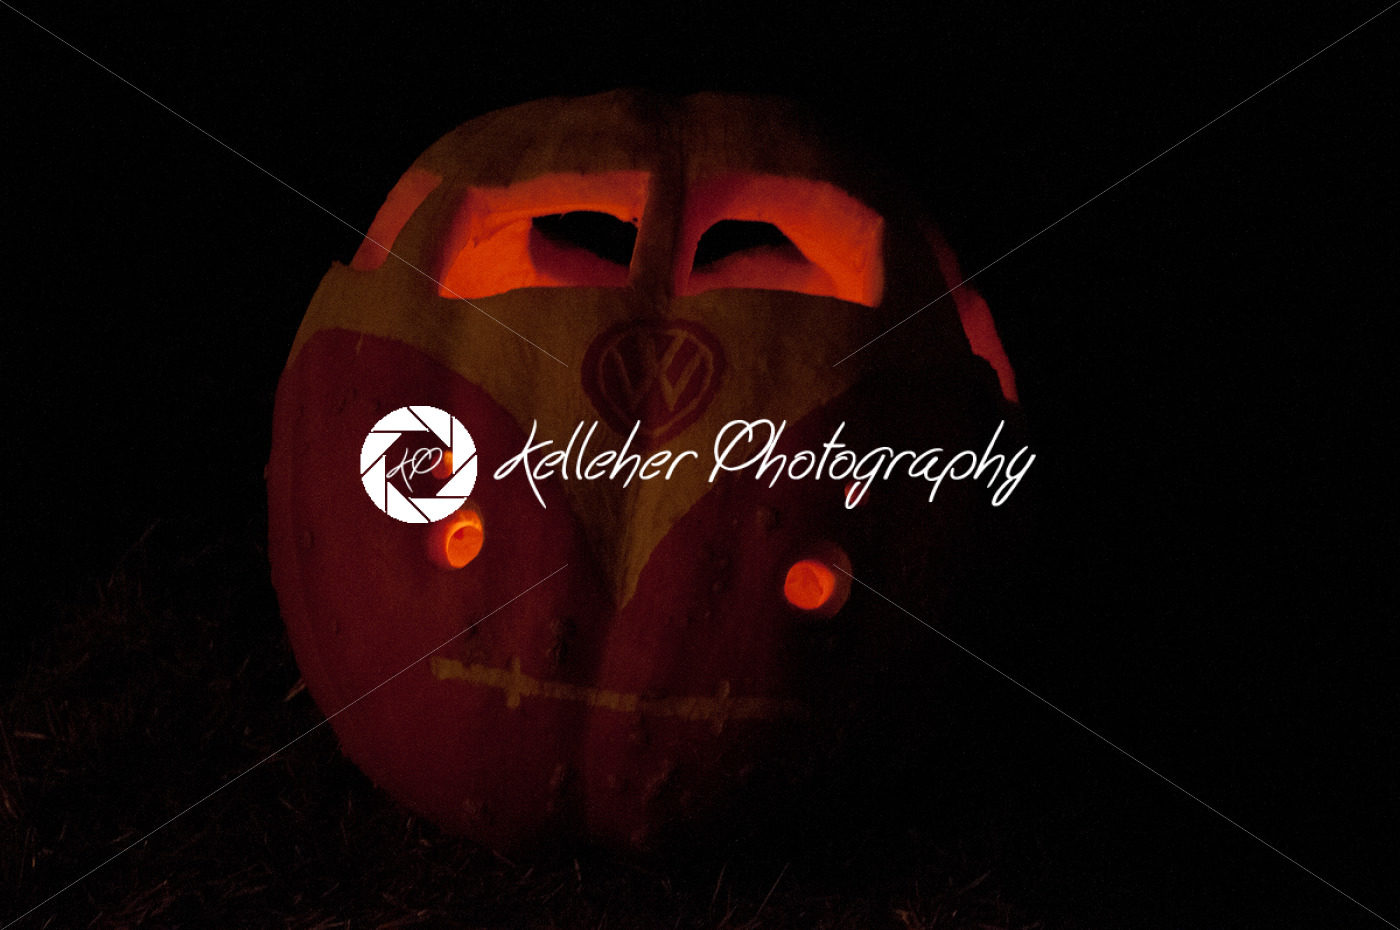 CHADDS FORD, PA – OCTOBER 26: VW Volkswagon Pumpkin at The Great Pumpkin Carve carving contest on October 26, 2013 - Kelleher Photography Store